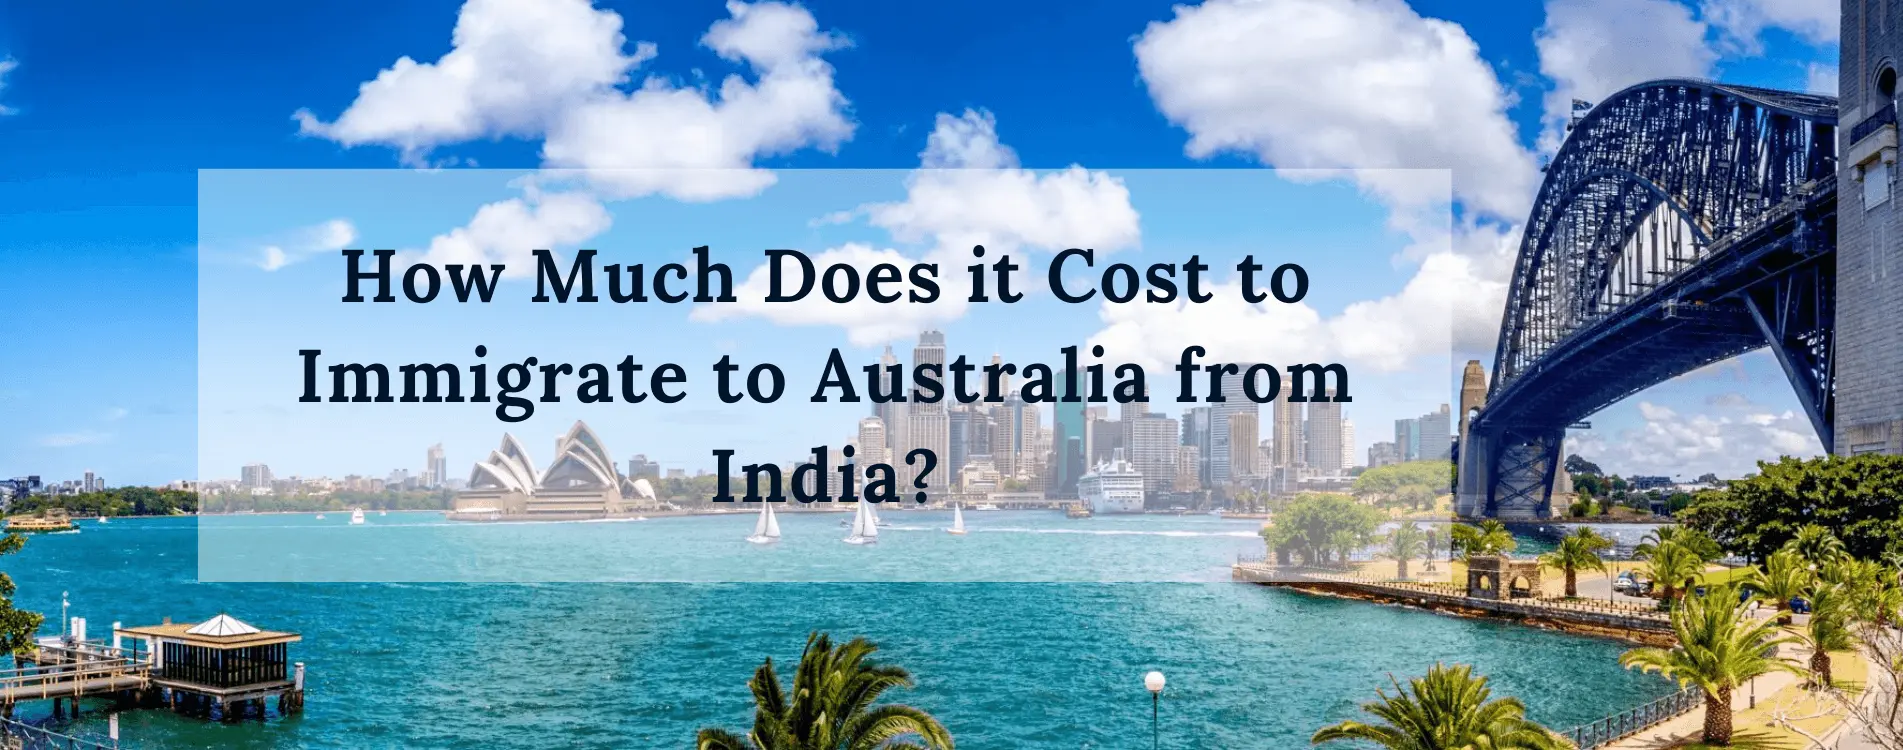 How Much Does It Cost to Immigrate to Australia from India?